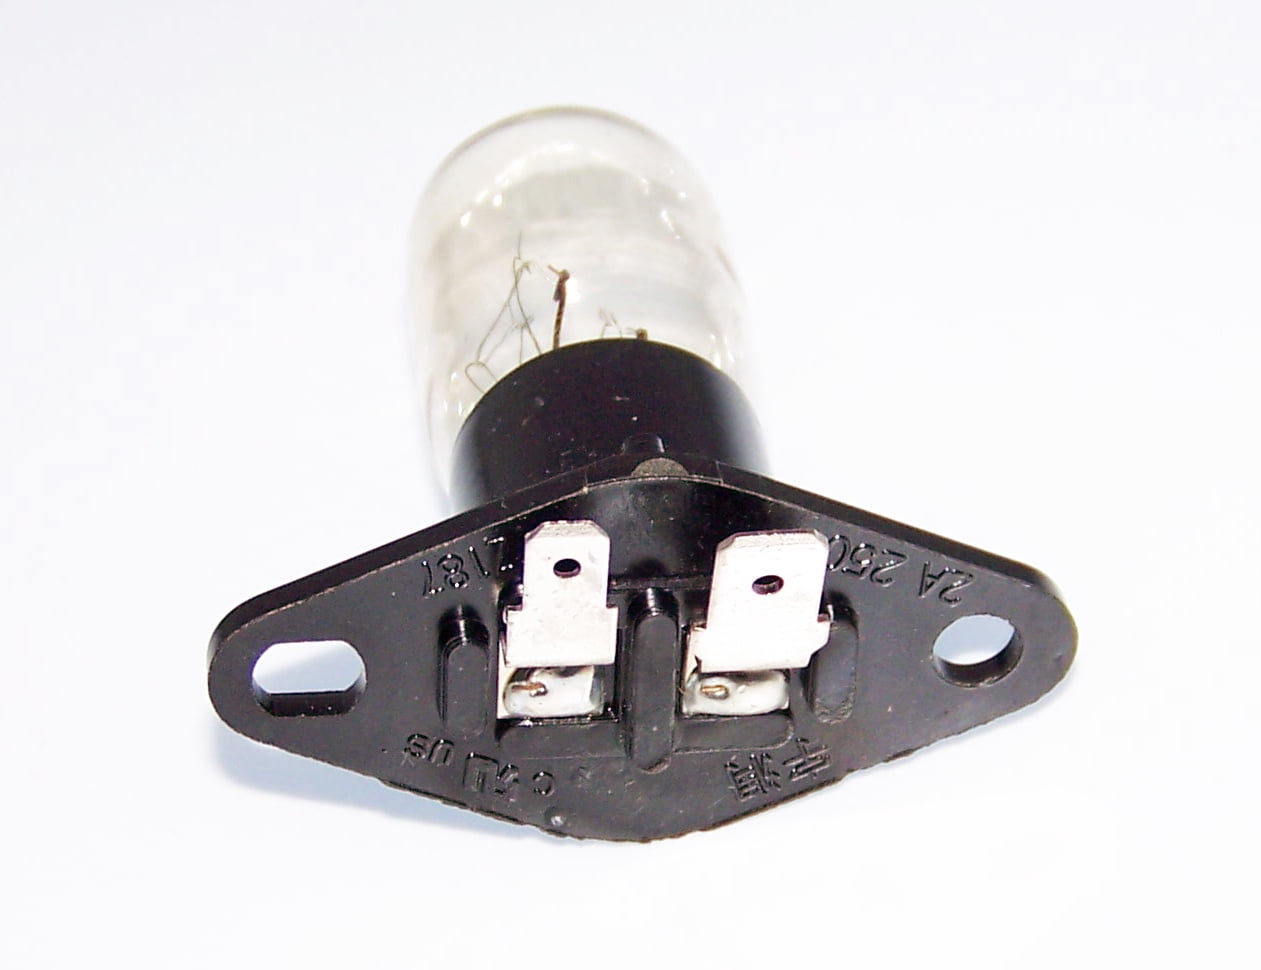 Microwave Oven Global Light Lamp Bulb Base Design 250V 2A Replacement Universal 